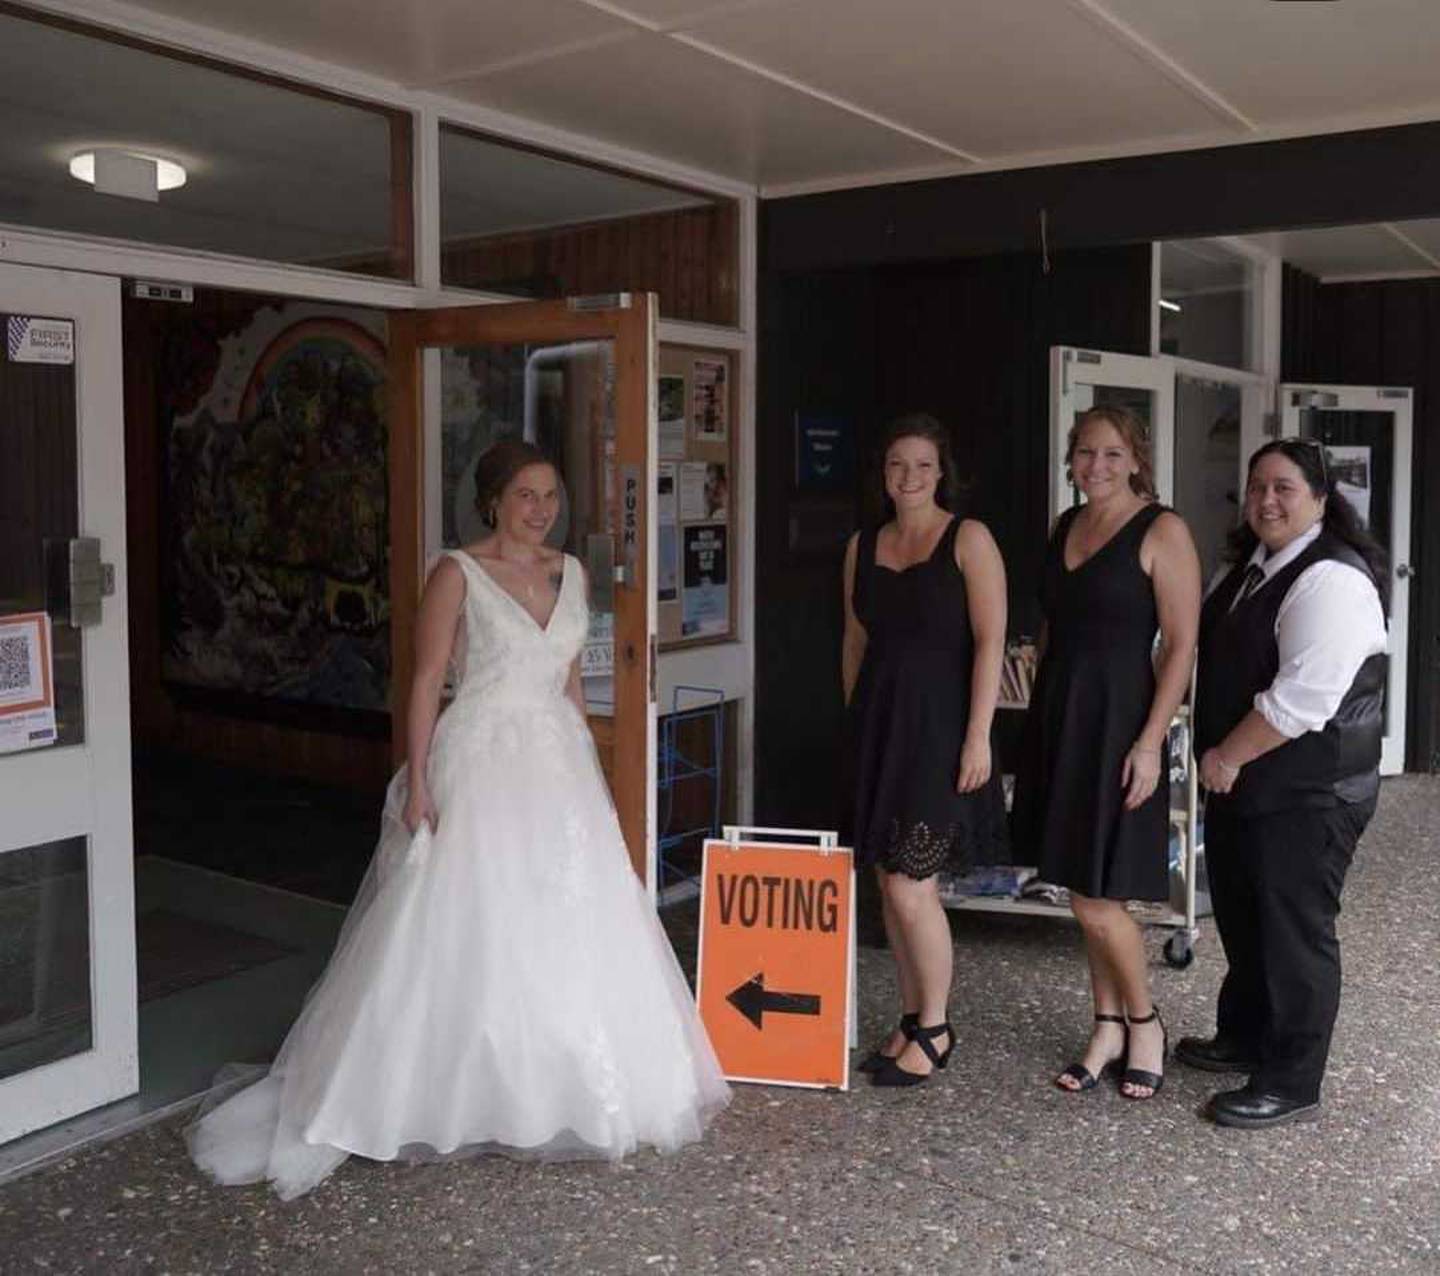 The bride voted accompanied by her bridesmaids. Photo / Ethan Lowry Photography